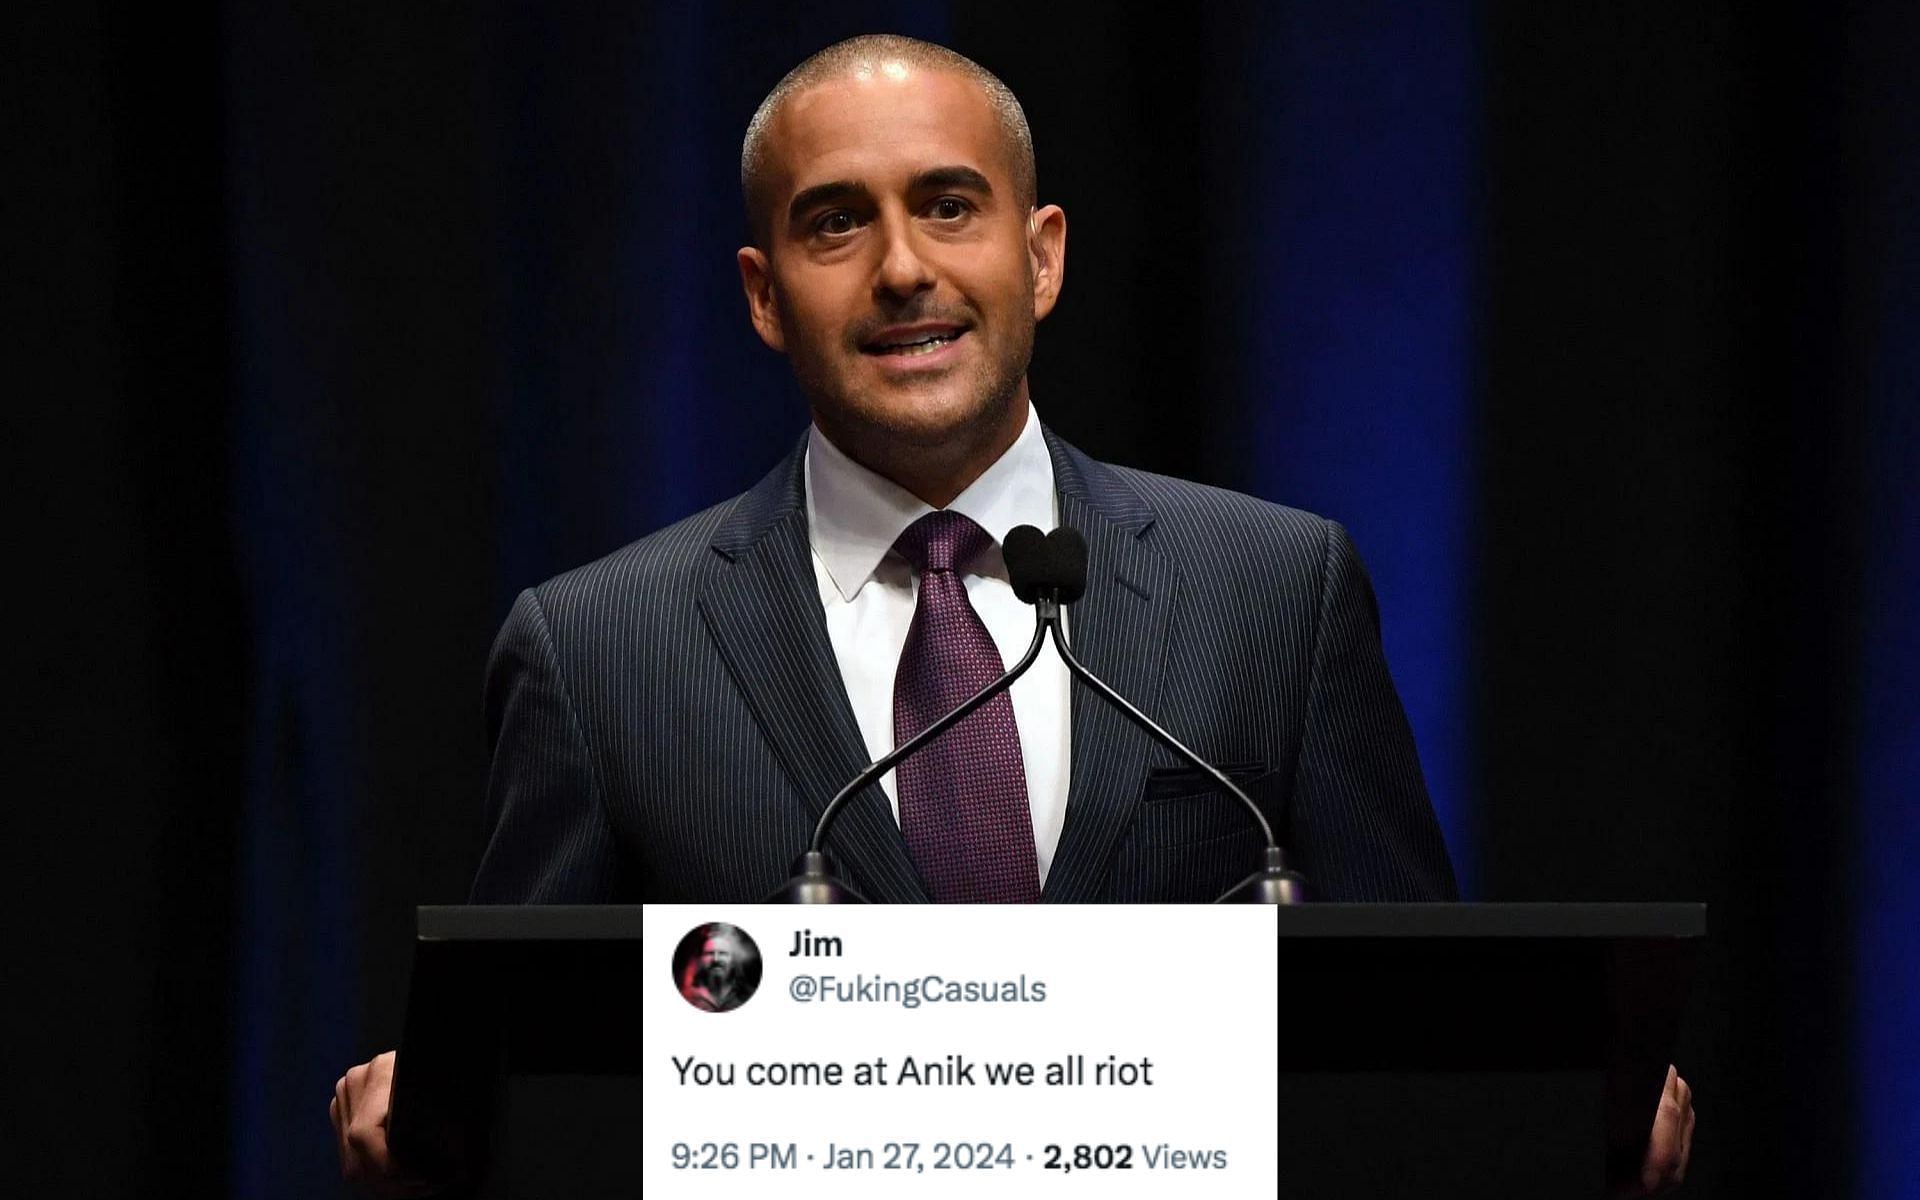 Jon Anik responds to the public reaction on his recent comments